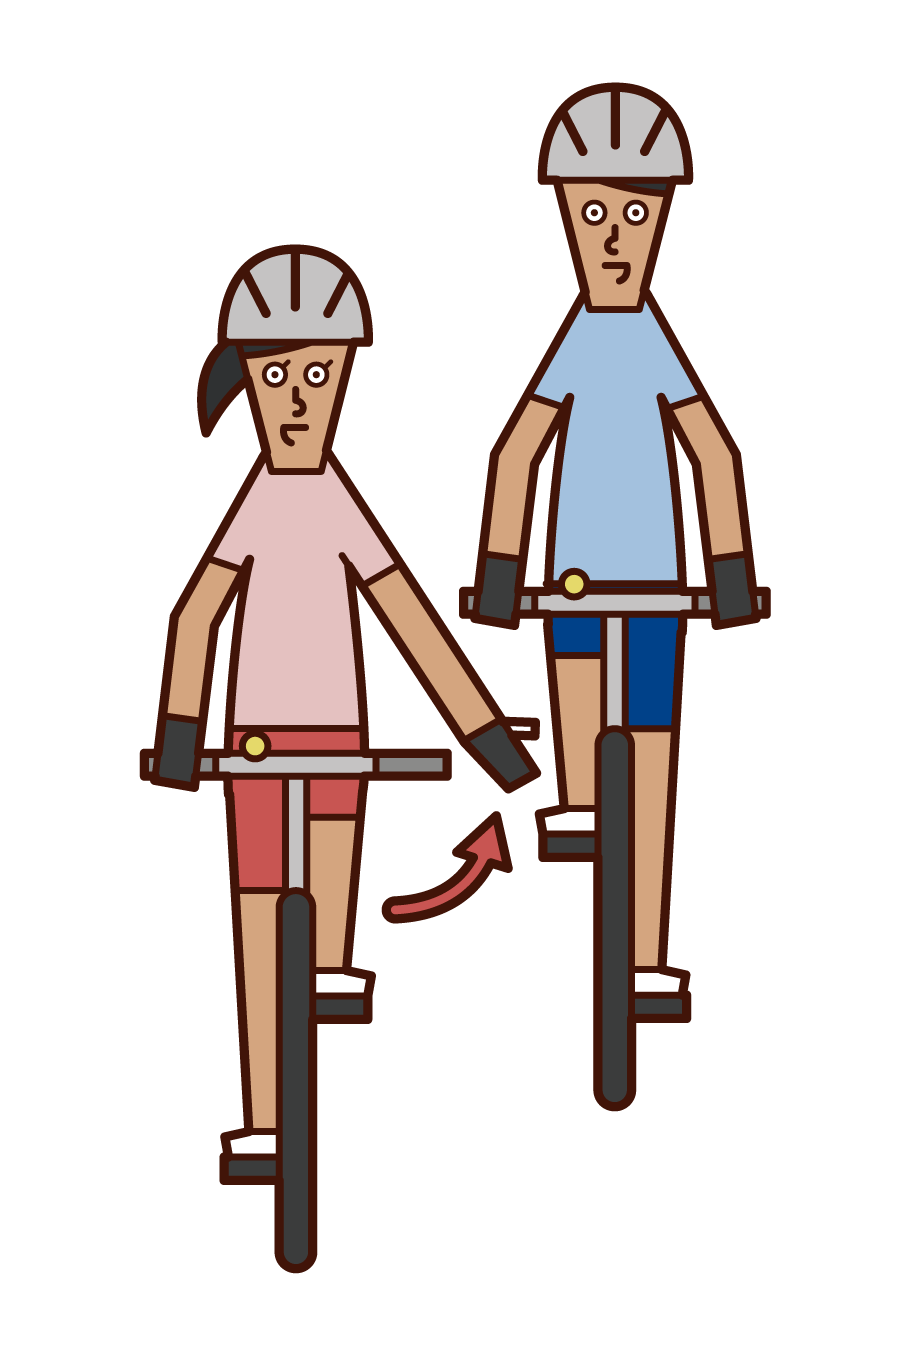 Illustration of a bicycle hand signal and a woman who has you go ahead